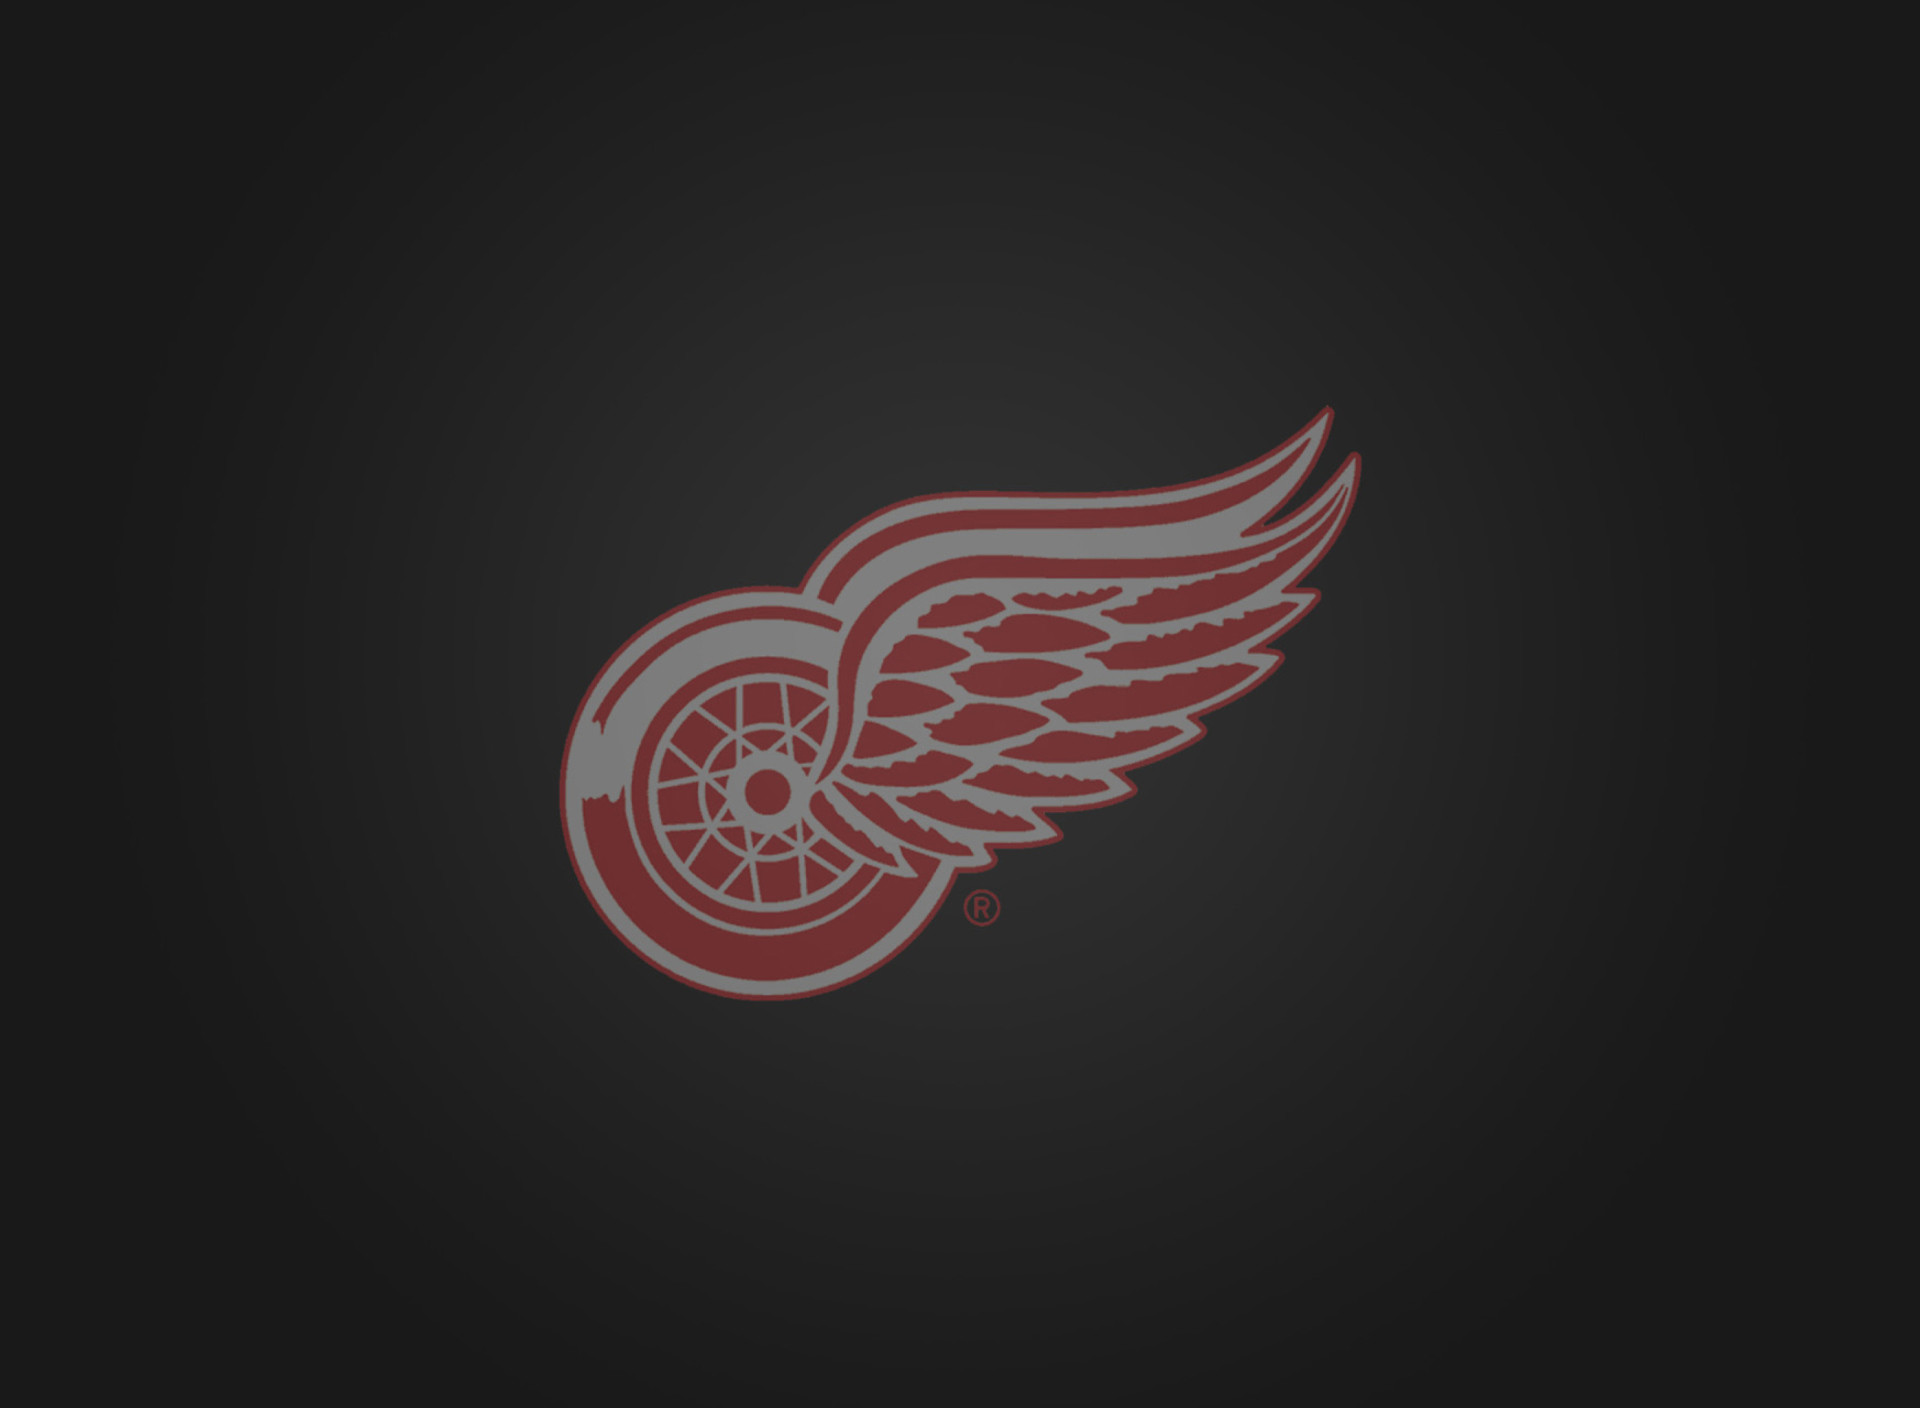 1920x1408 Detroit Red Wings Wallpaper for Samsung Galaxy Note 3